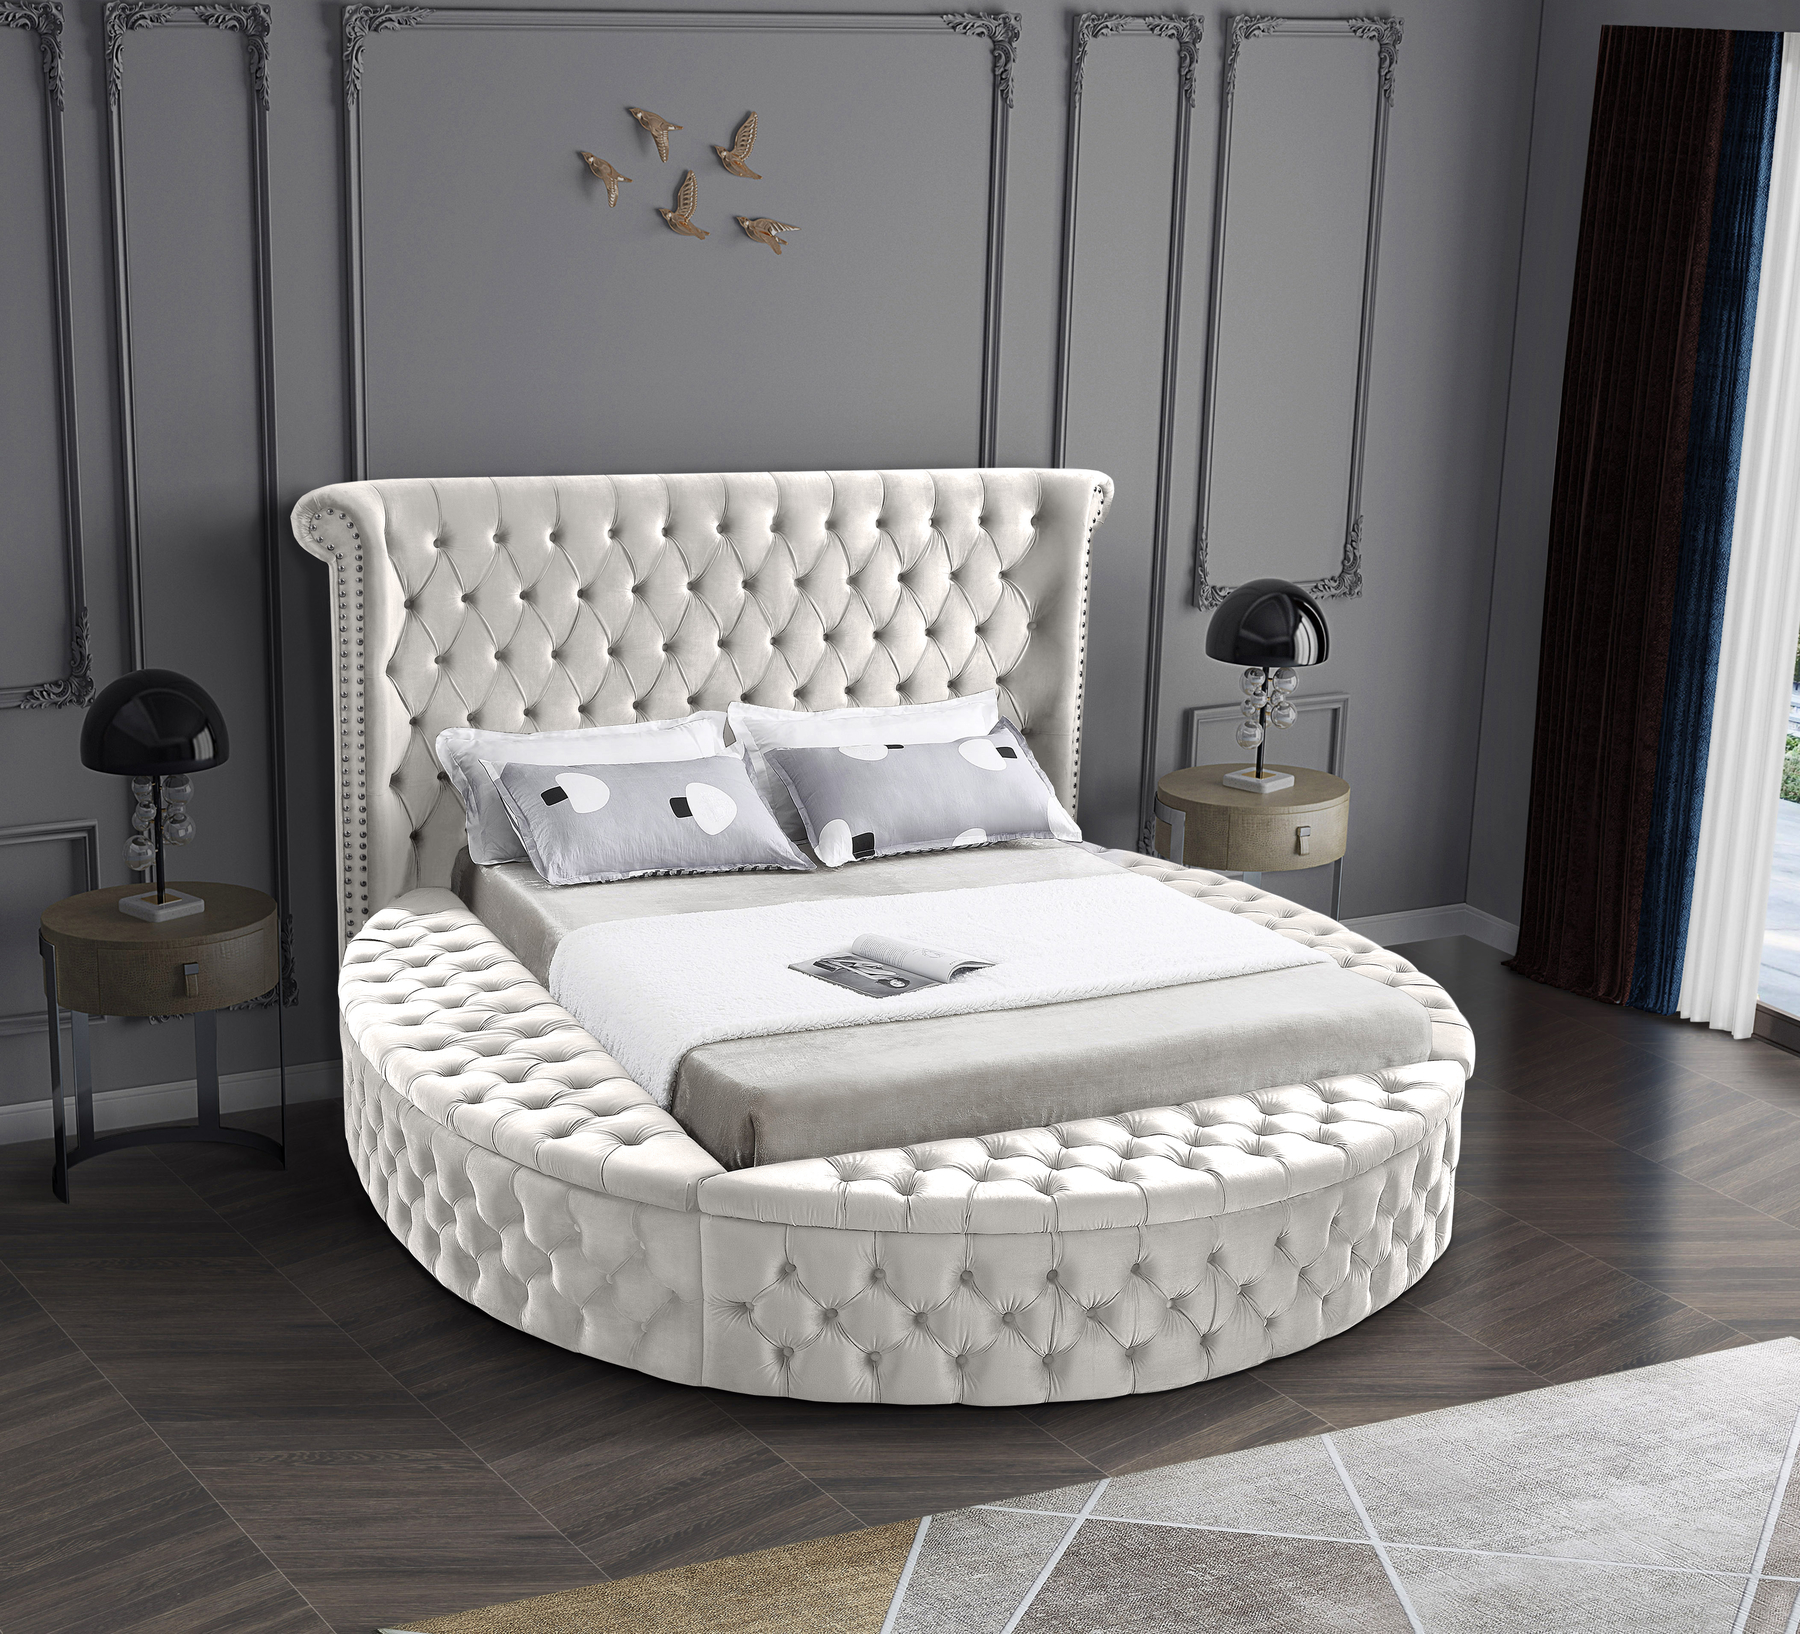 Meridian Luxus Cream Full Size Bed, Round Tufted Bed With Storage